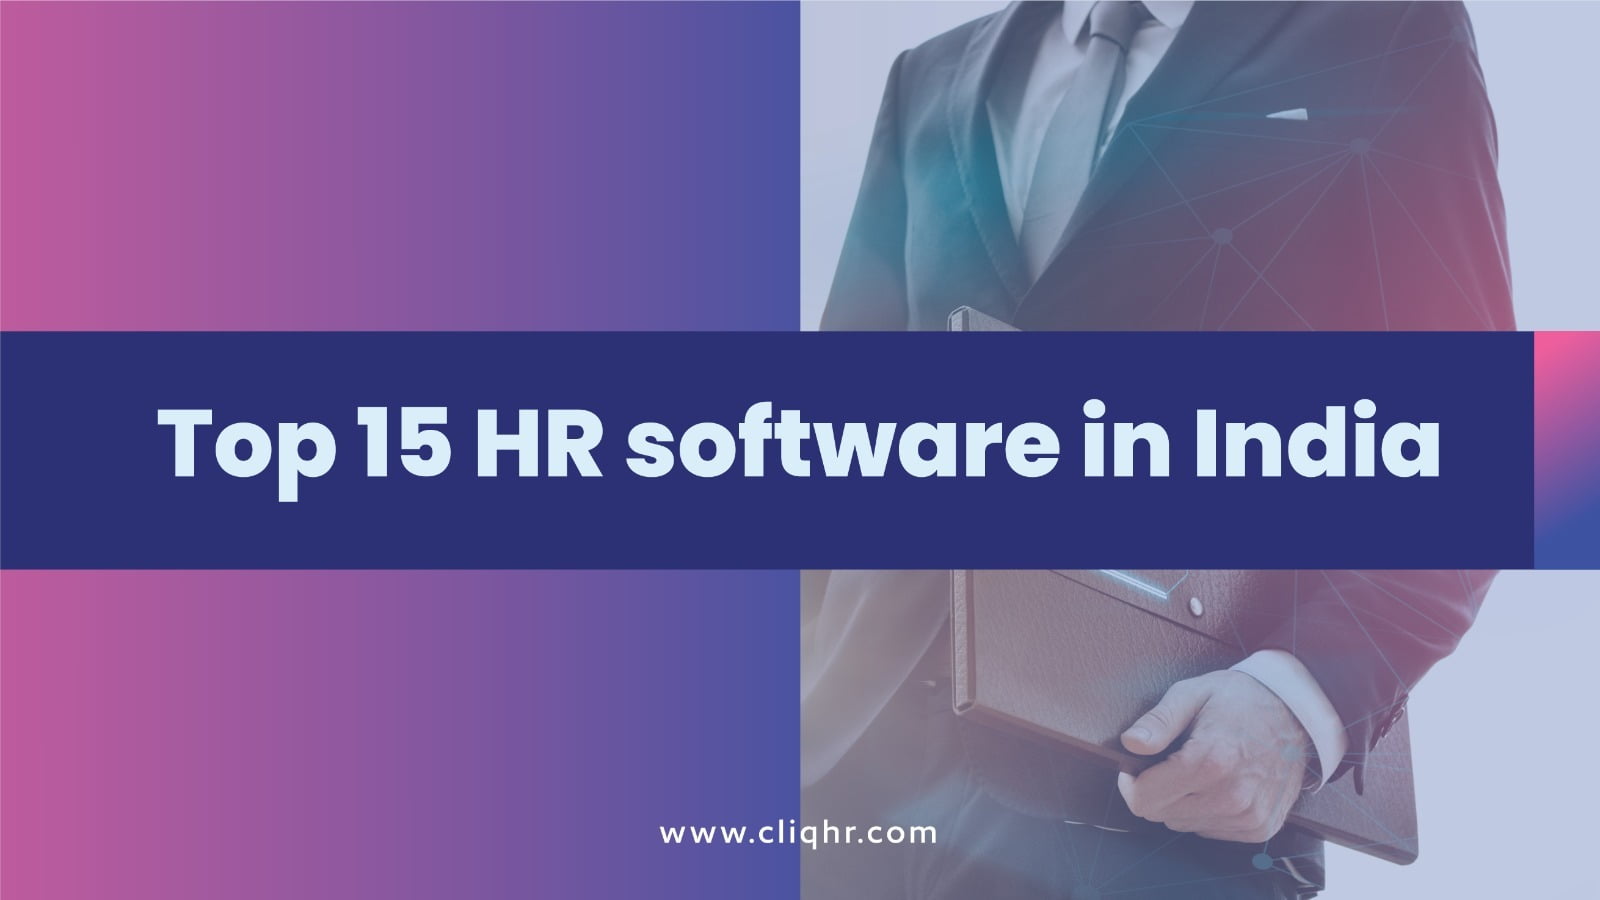 Top 15 HR software in India